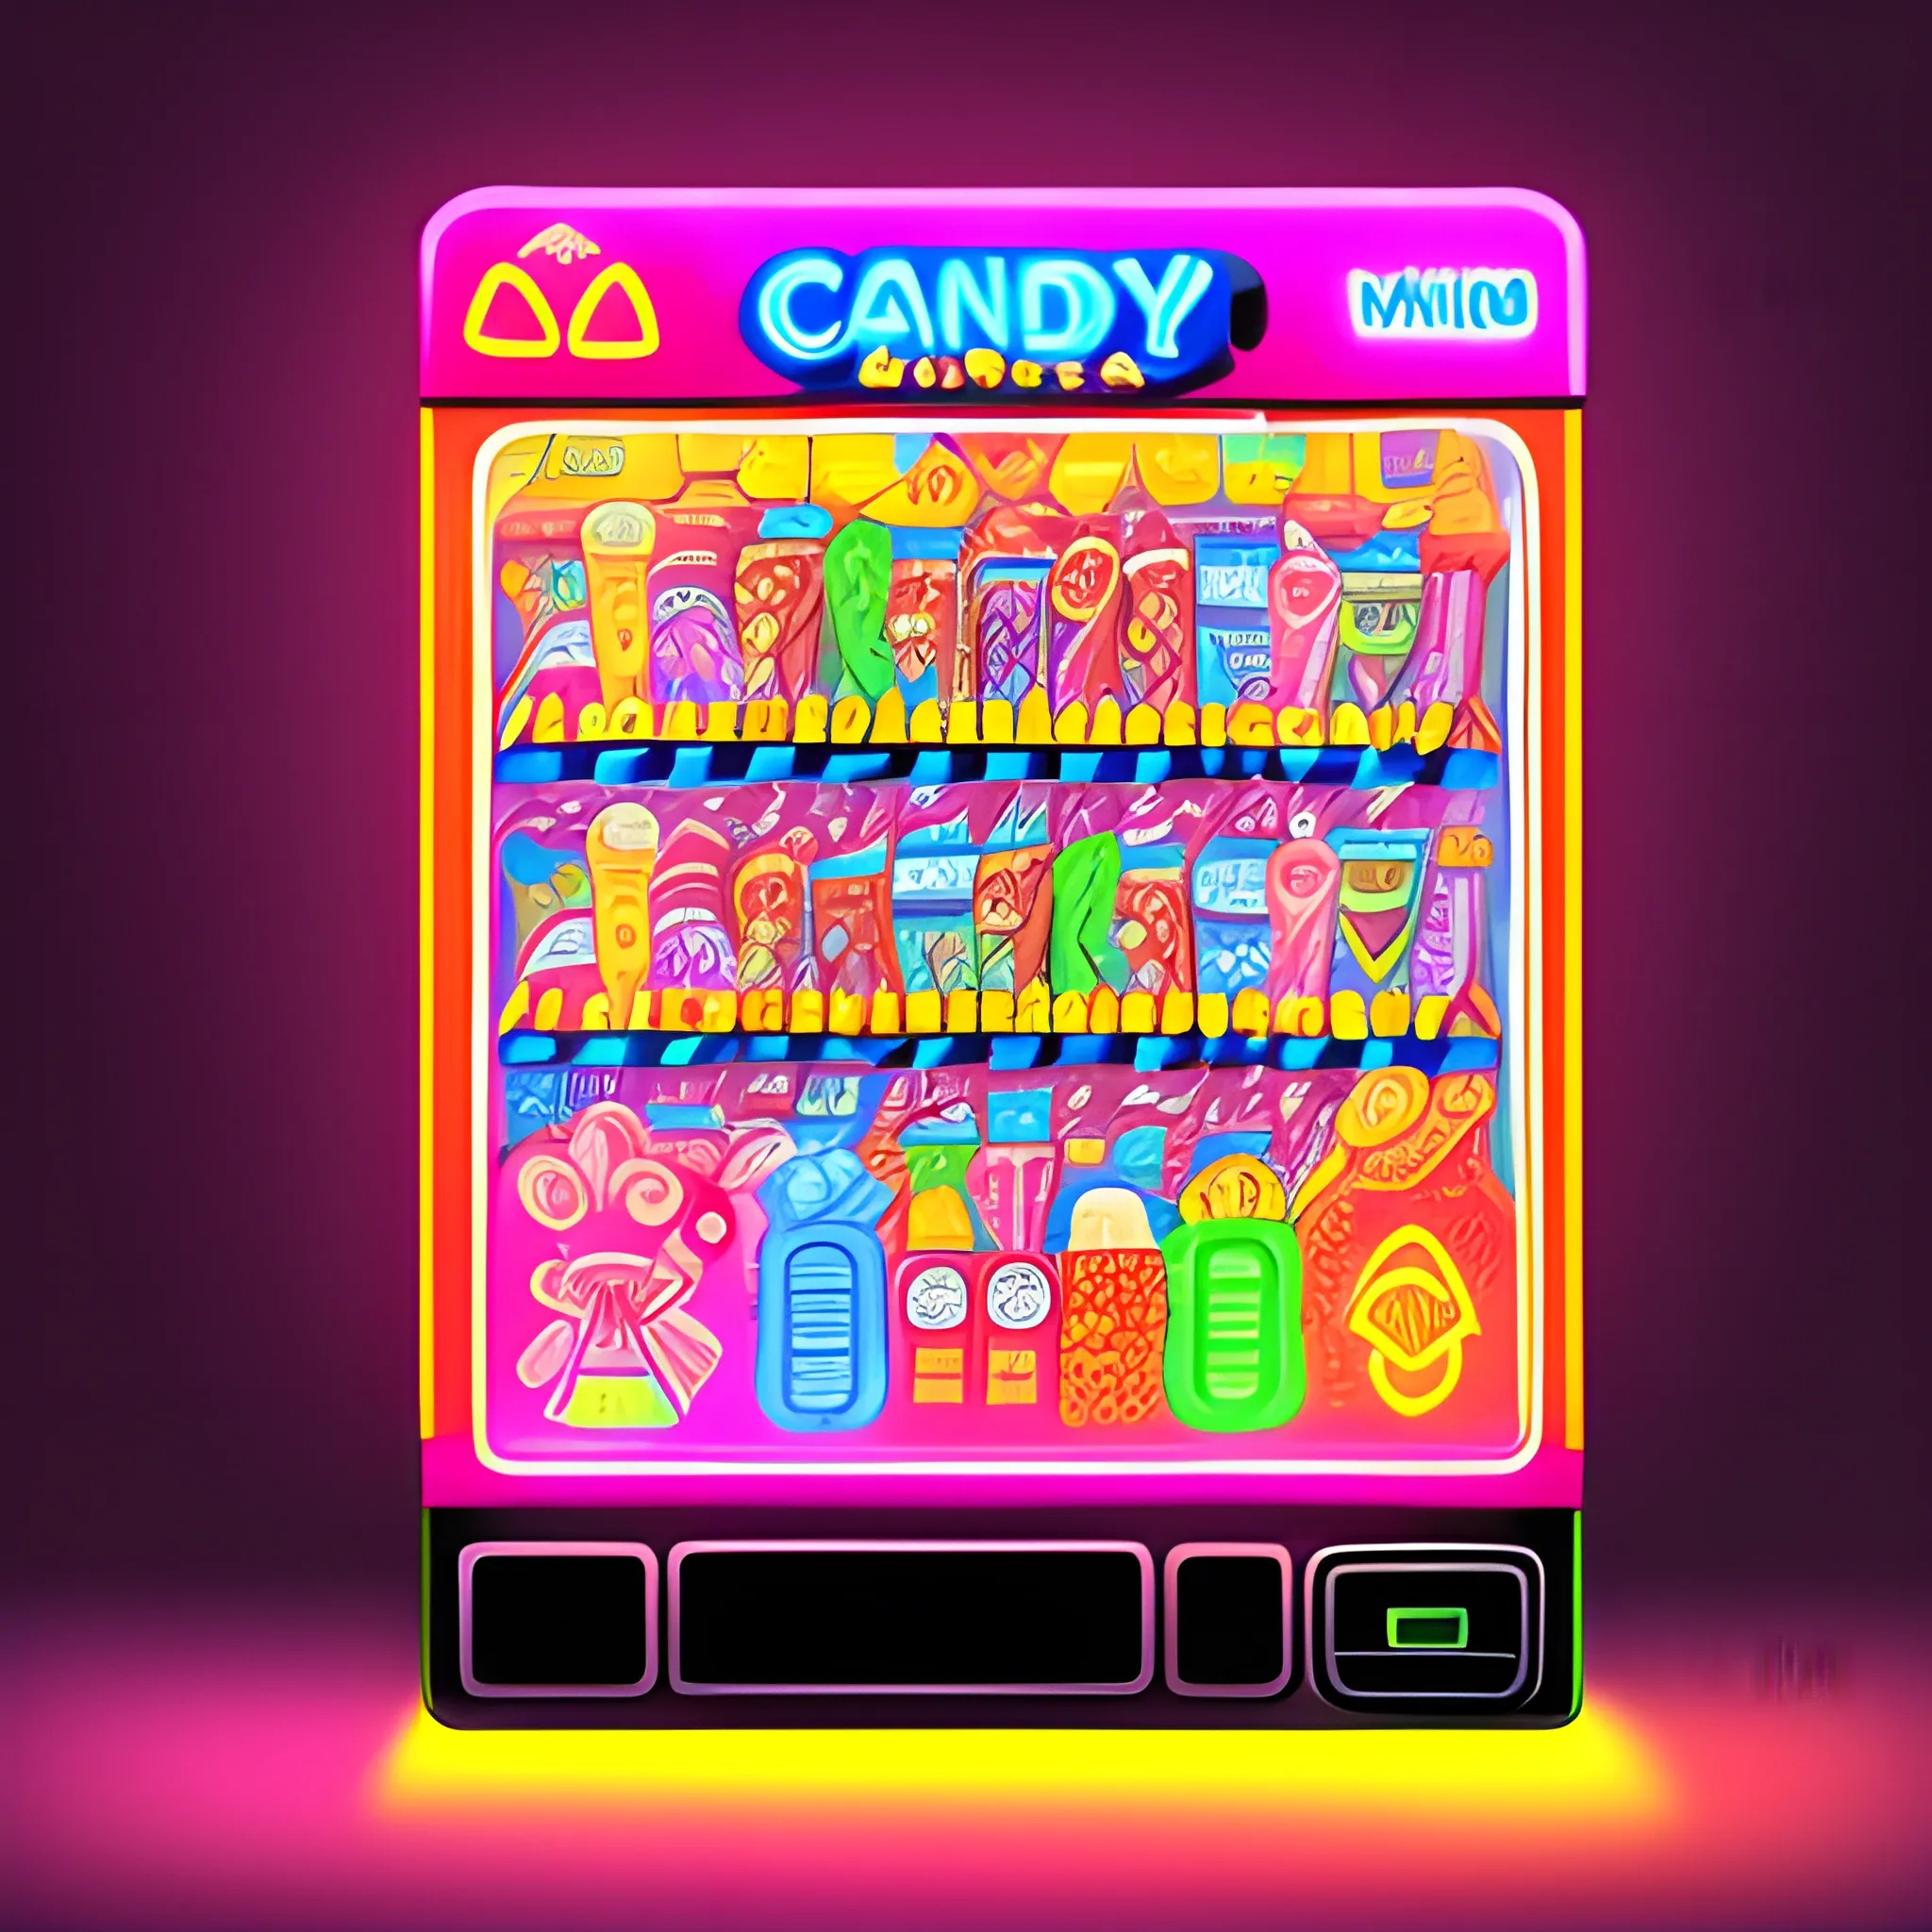 candy, beverage, toy vending machine in digital drawing style with neon lights, with a close-up view